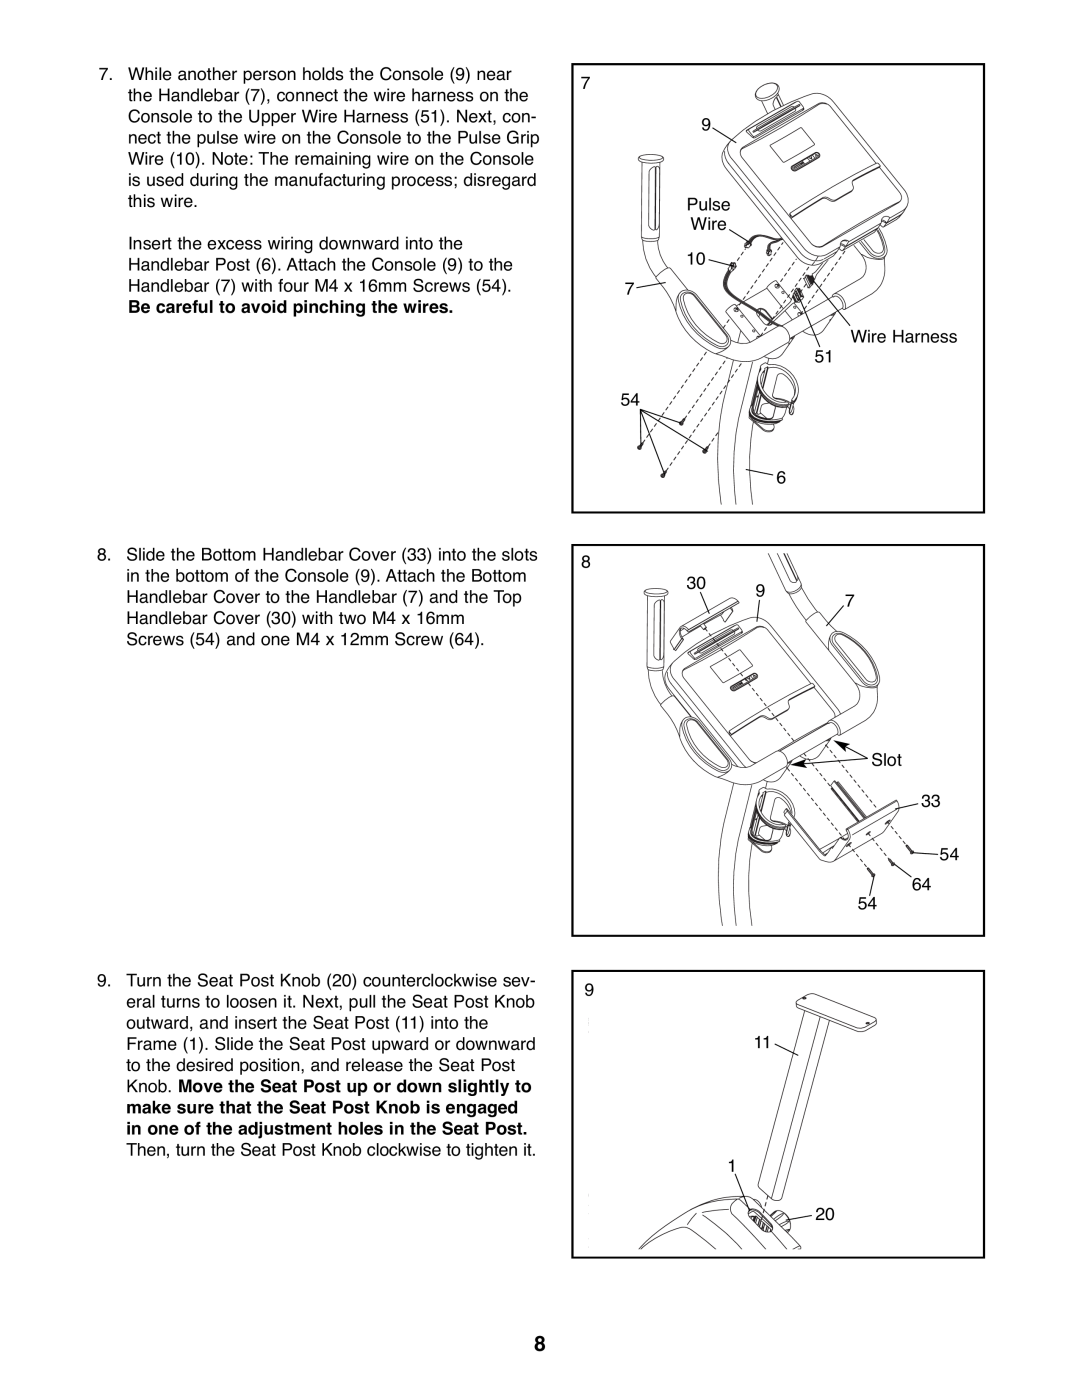 NordicTrack NTEX3196.0 user manual Be careful to avoid pinching the wires 